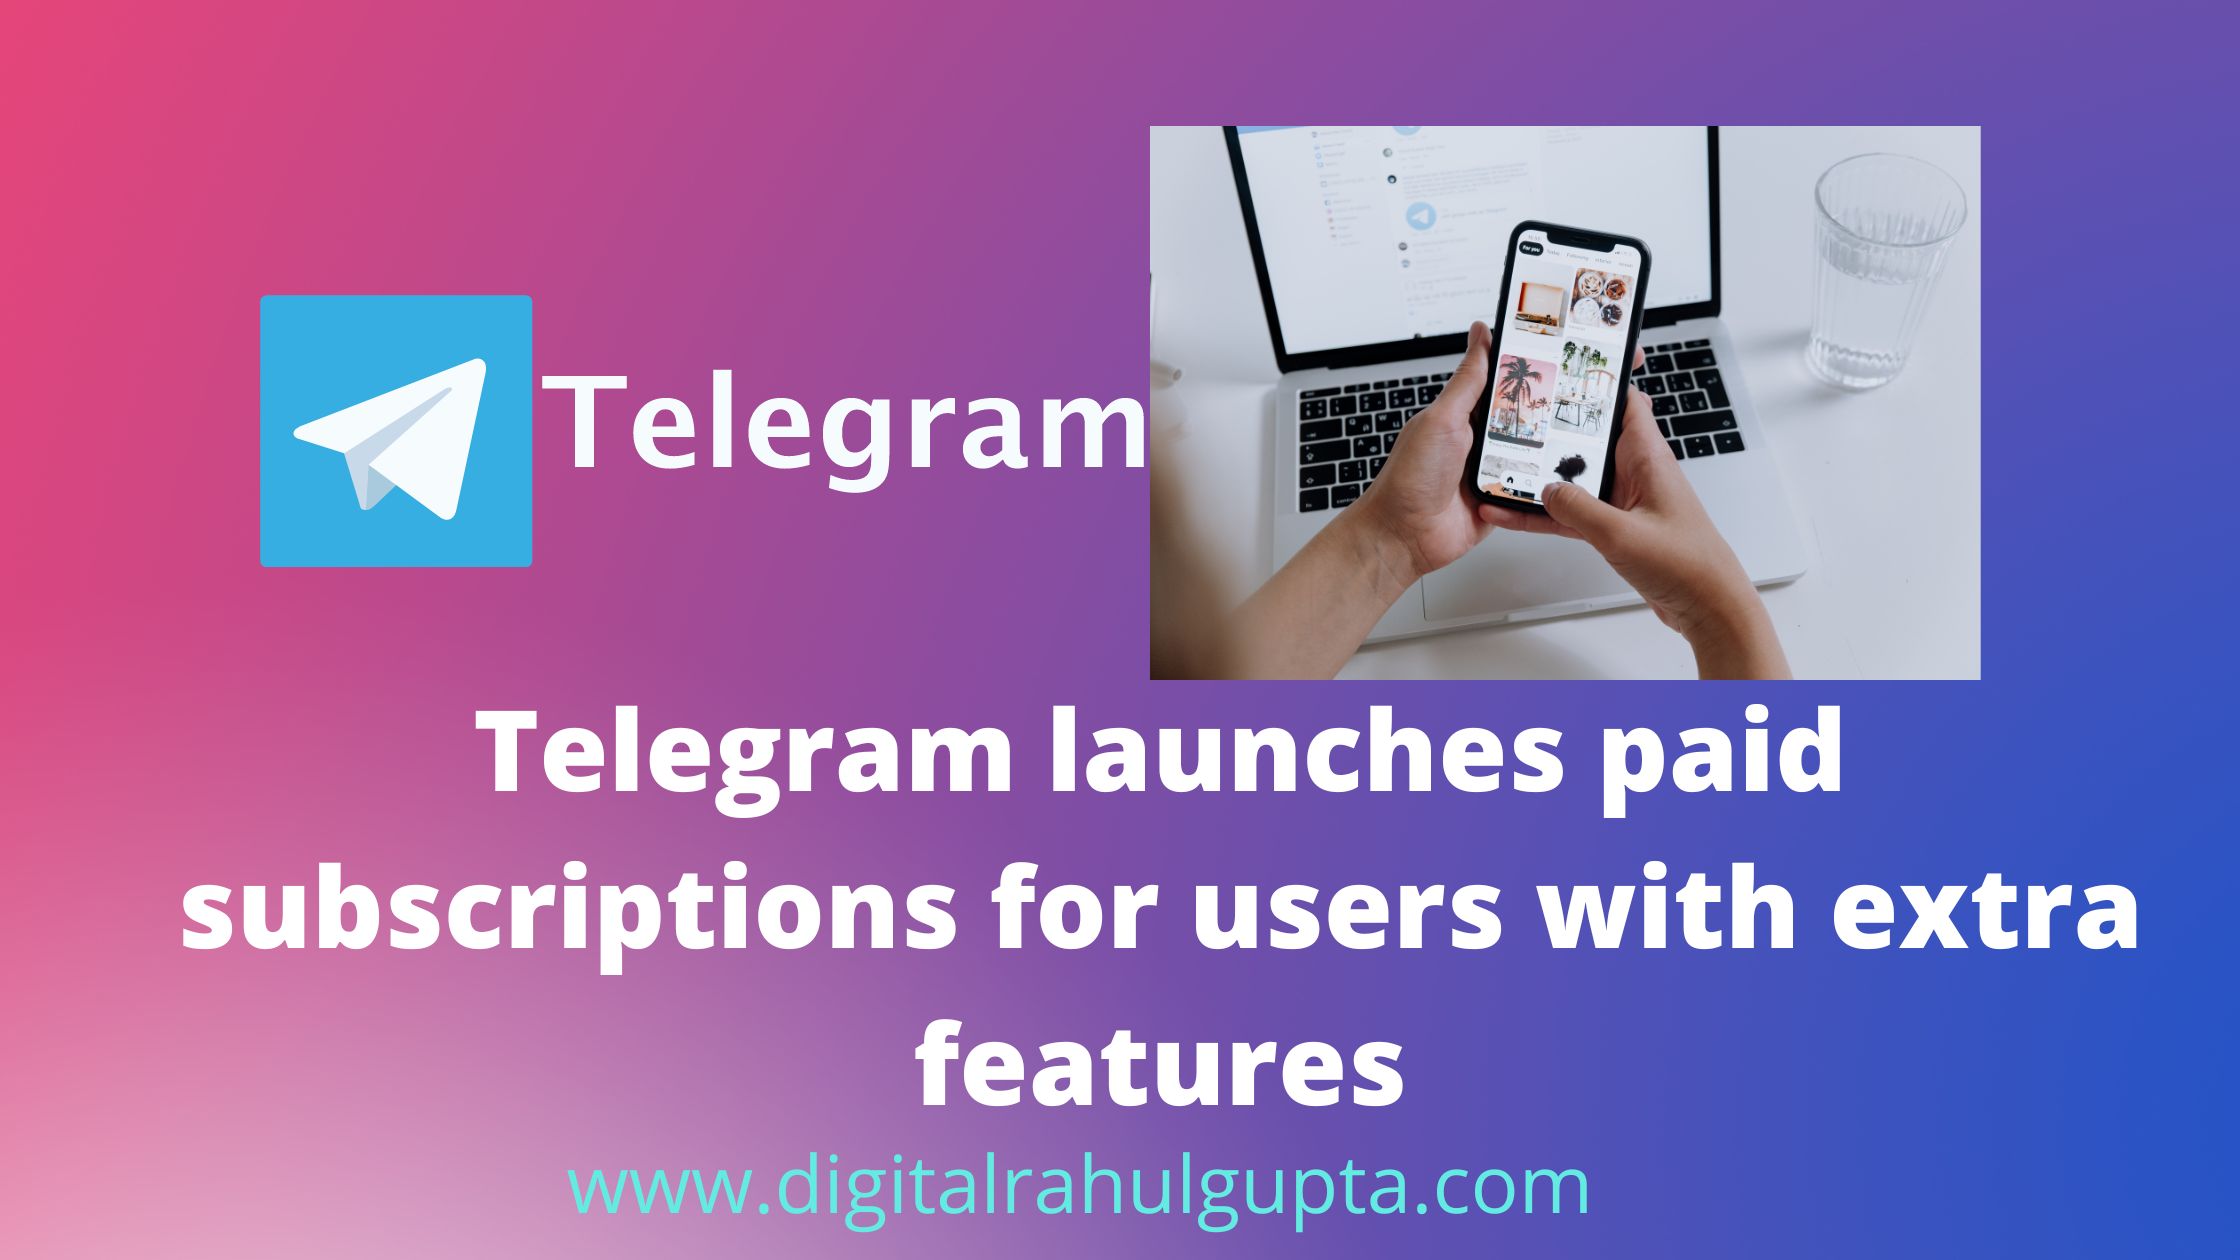 Telegram launches paid subscriptions for users who want more features